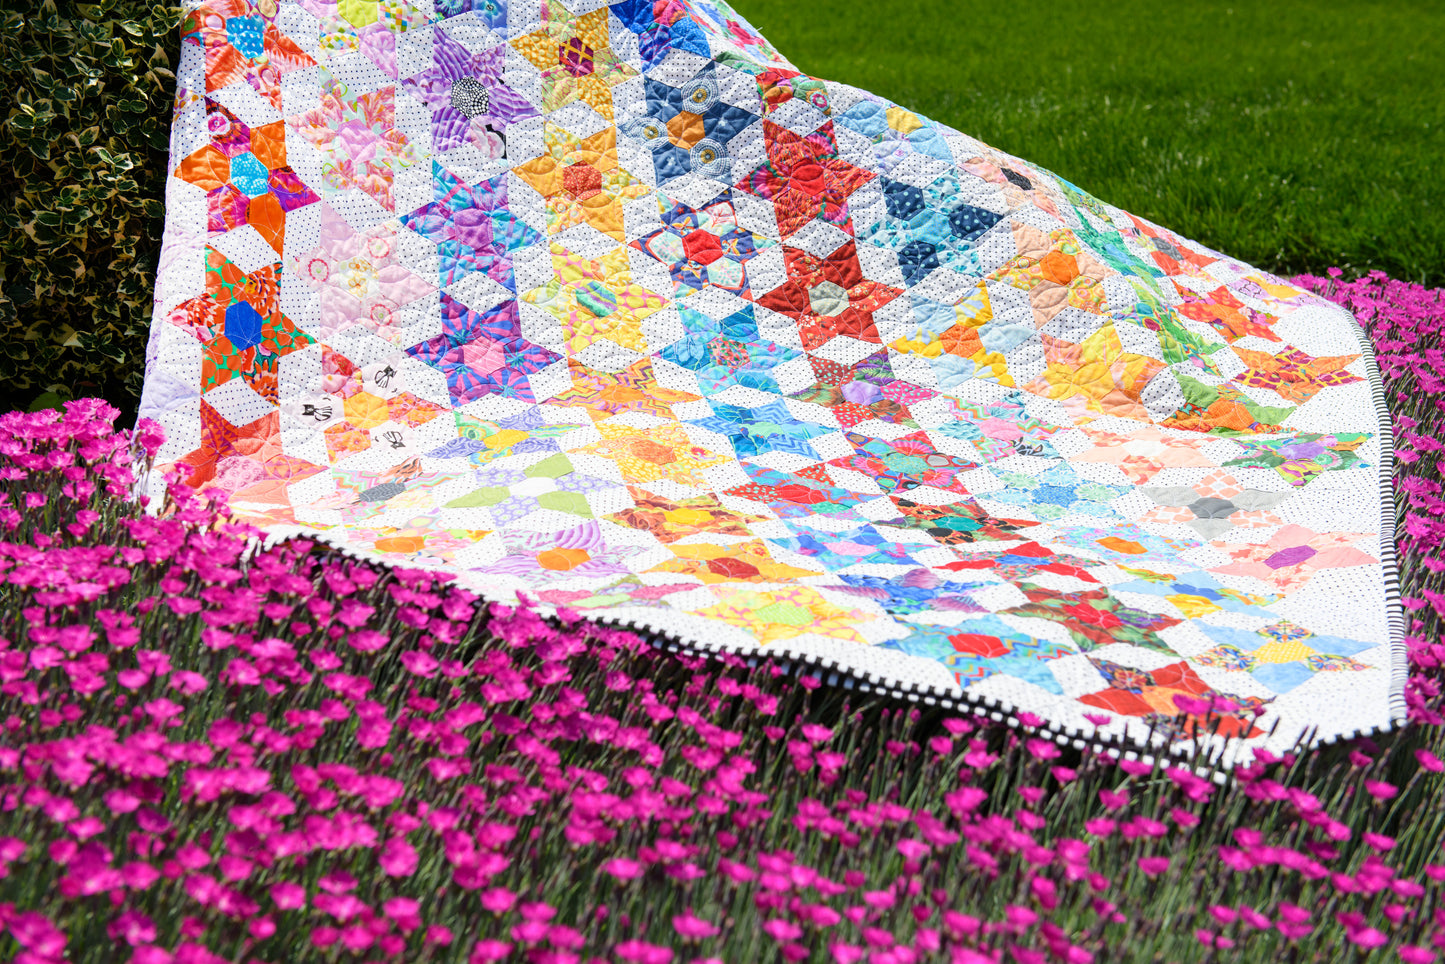 Daisy Chain quilt made with English Paper Piecing Made Easy templates outdoor photo